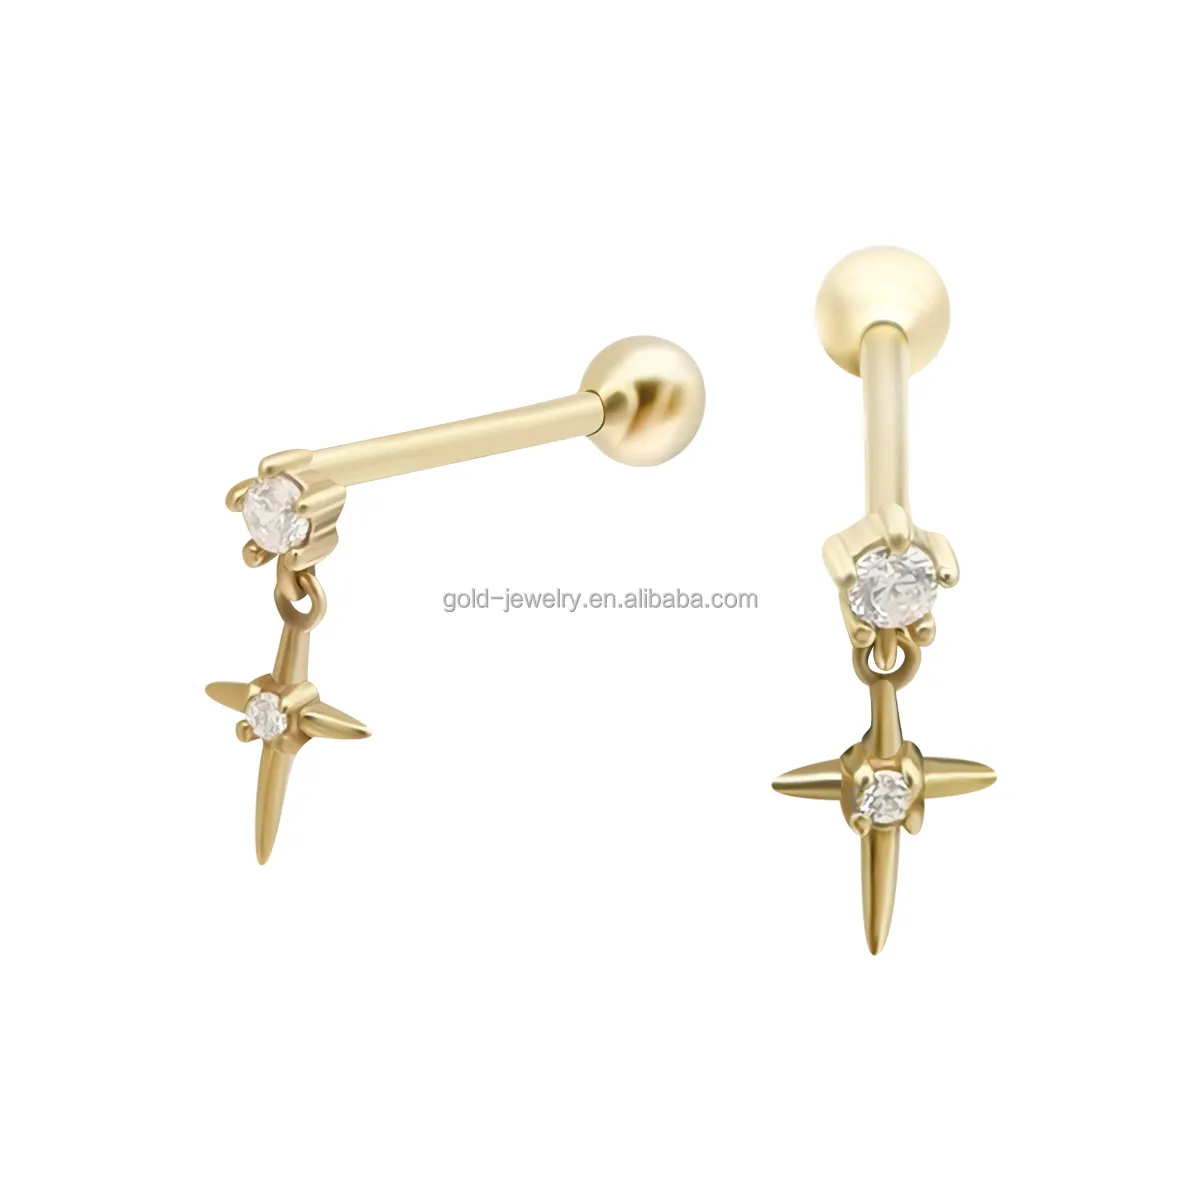 Personalized Design 9k Real Yellow Gold Earring With CZ Stone Dangle Cross Jewelry Women Gold Earrings